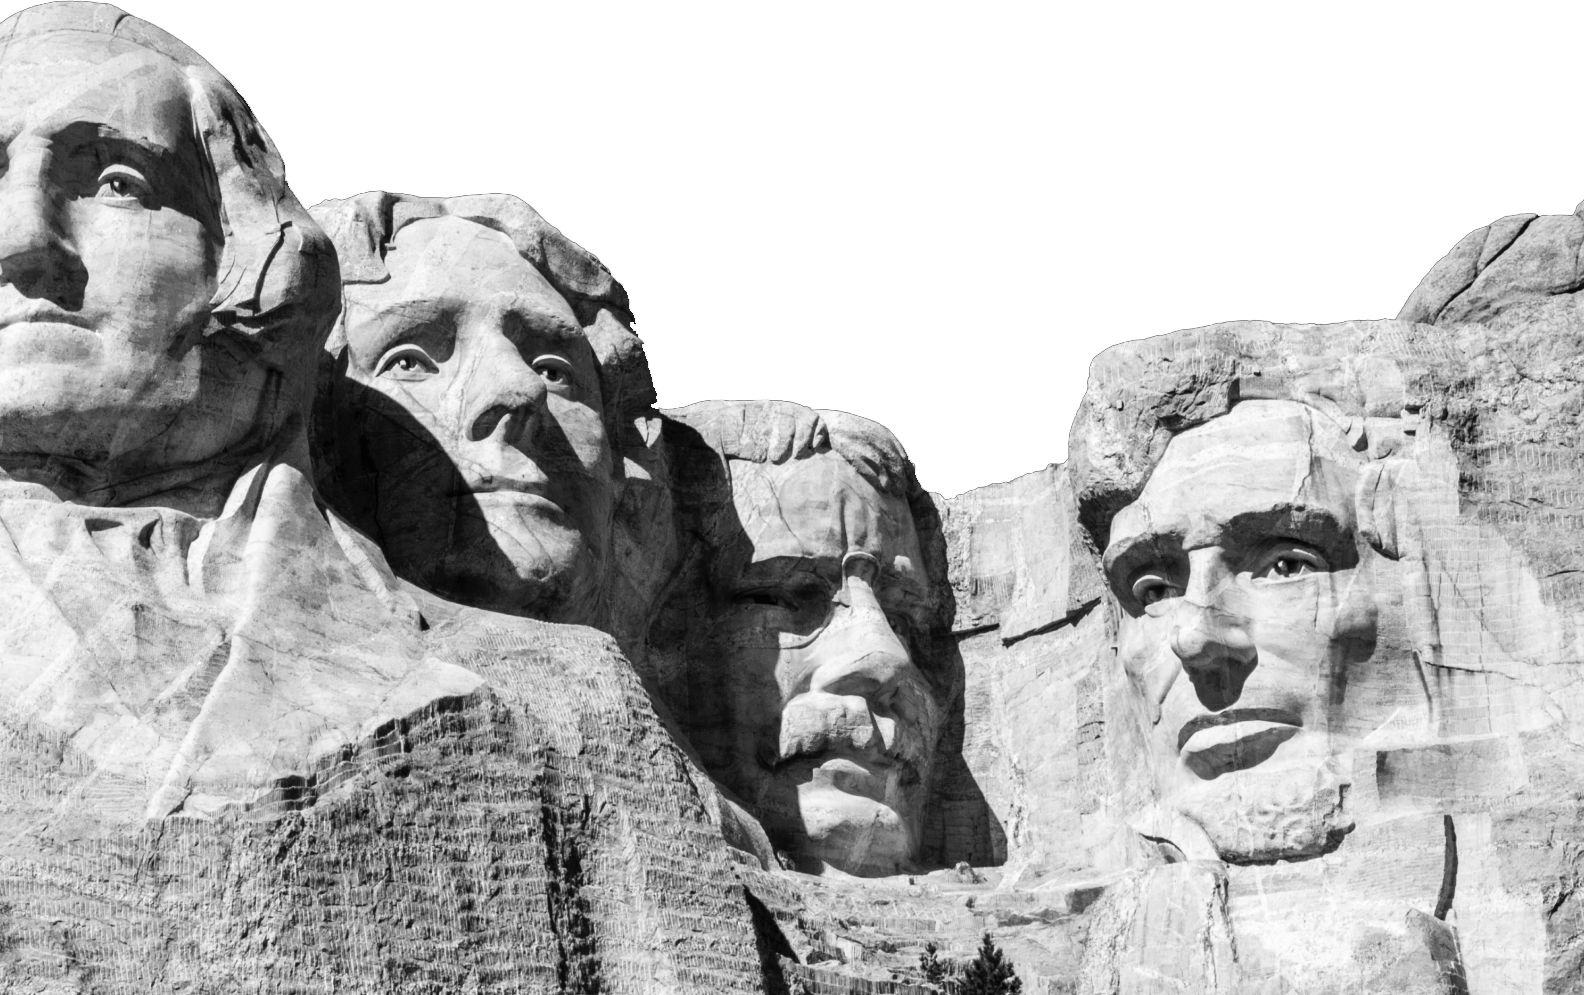 Black and white image of Mount Rushmore with grey background color.